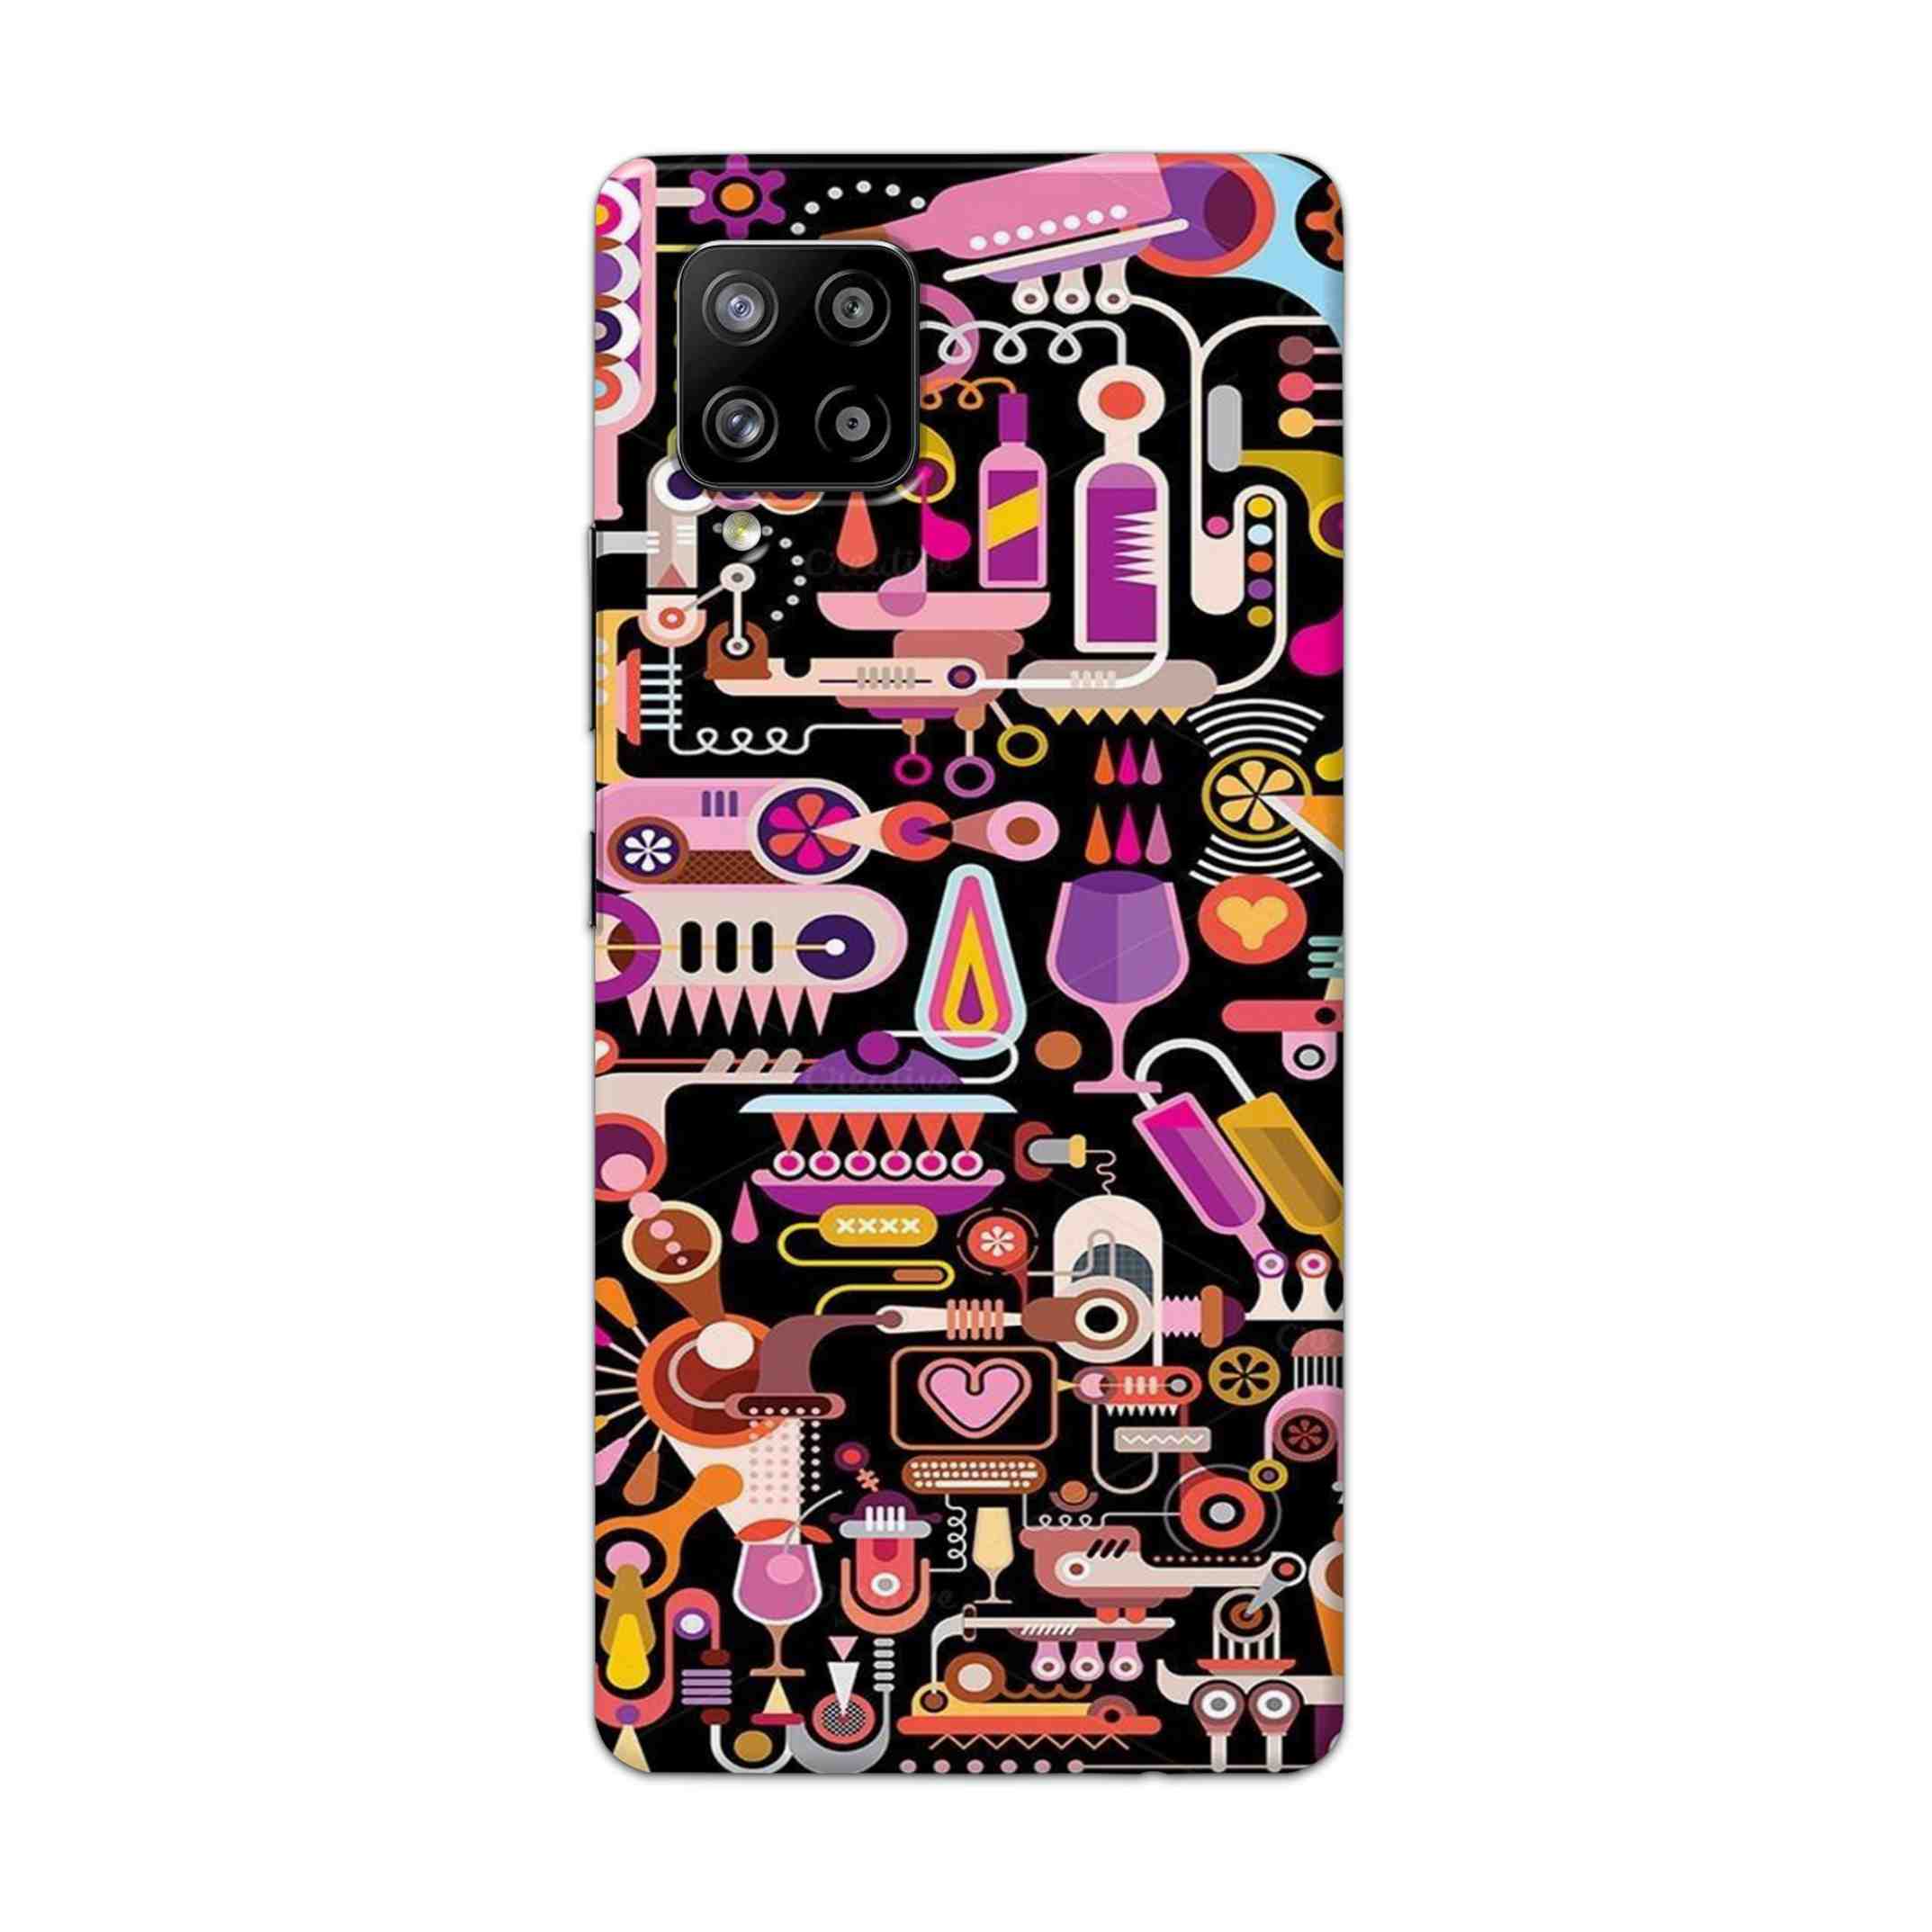 Buy Lab Art Hard Back Mobile Phone Case Cover For Samsung Galaxy M42 Online